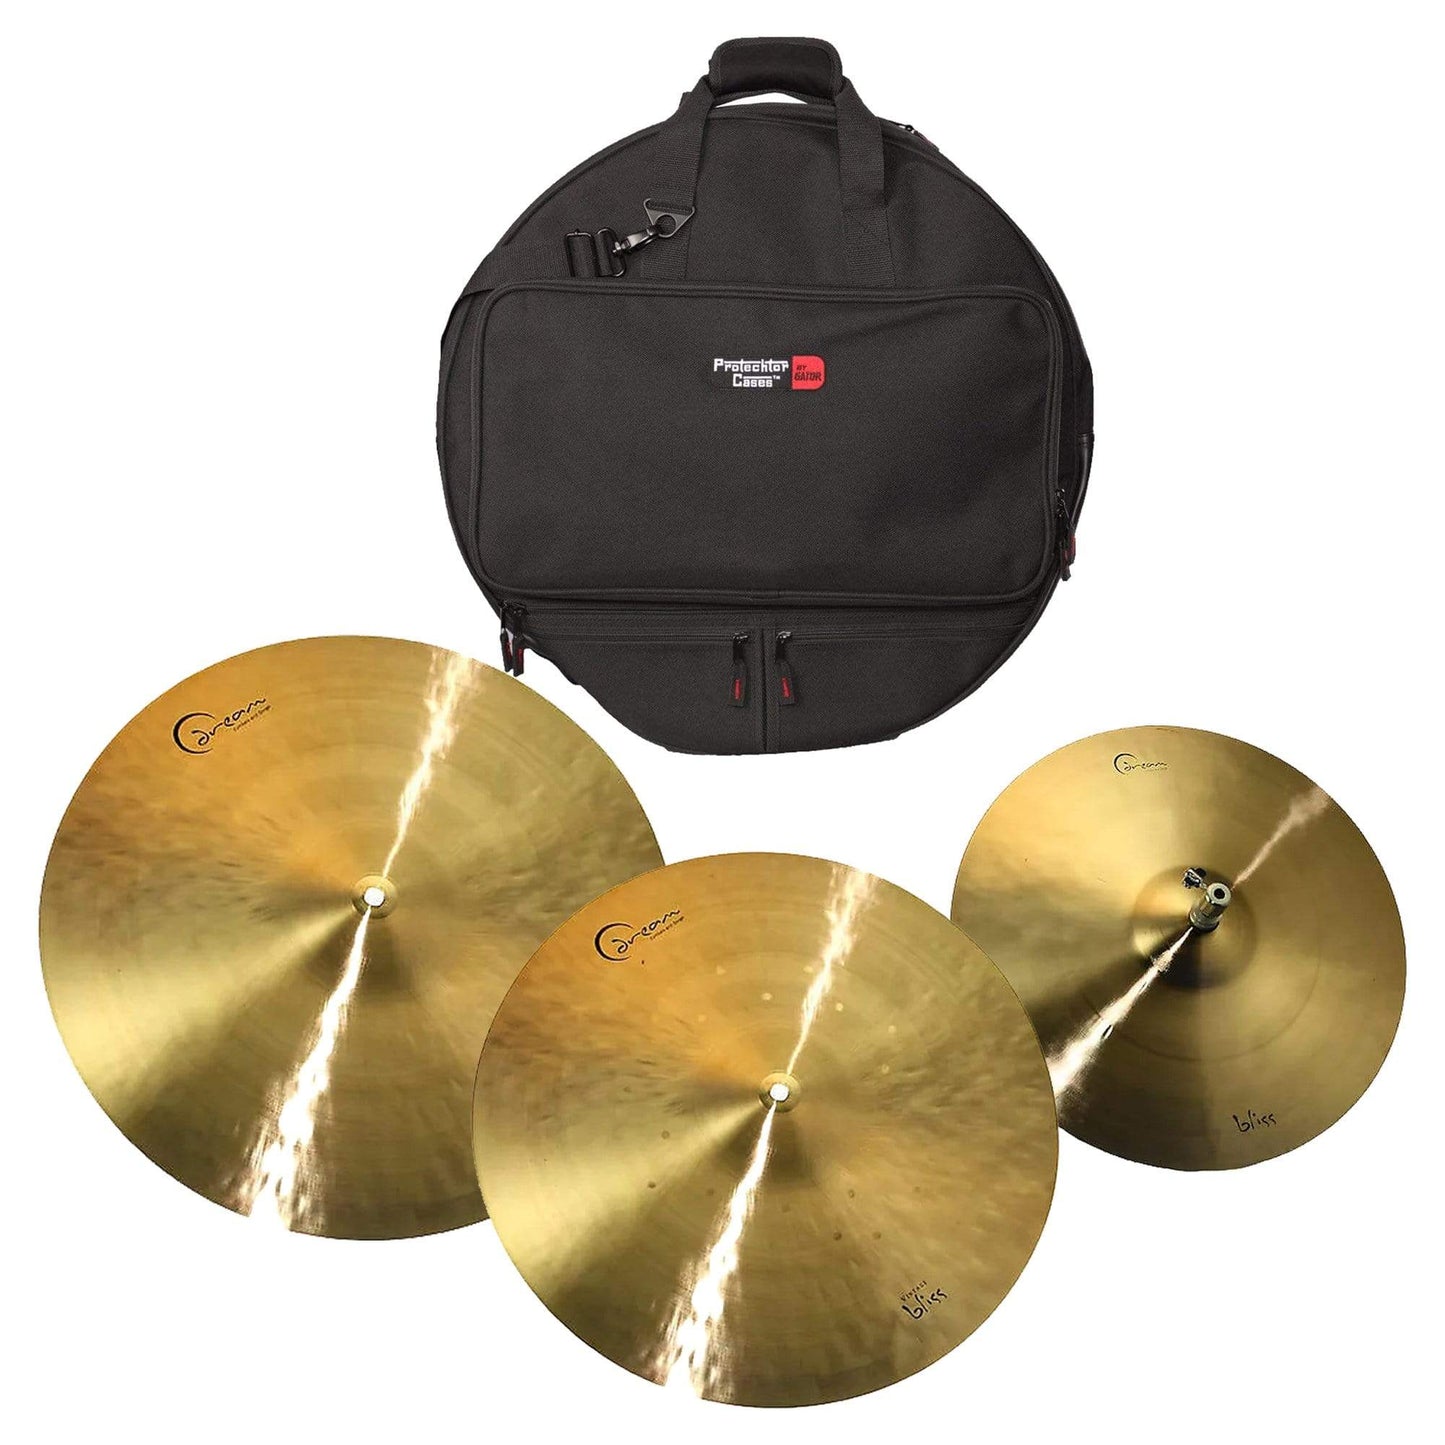 Dream 15/18/22" Dream Bliss Cymbal Set (w/Gator 22" Backpack Cymbal Bag) Drums and Percussion / Cymbals / Cymbal Packs